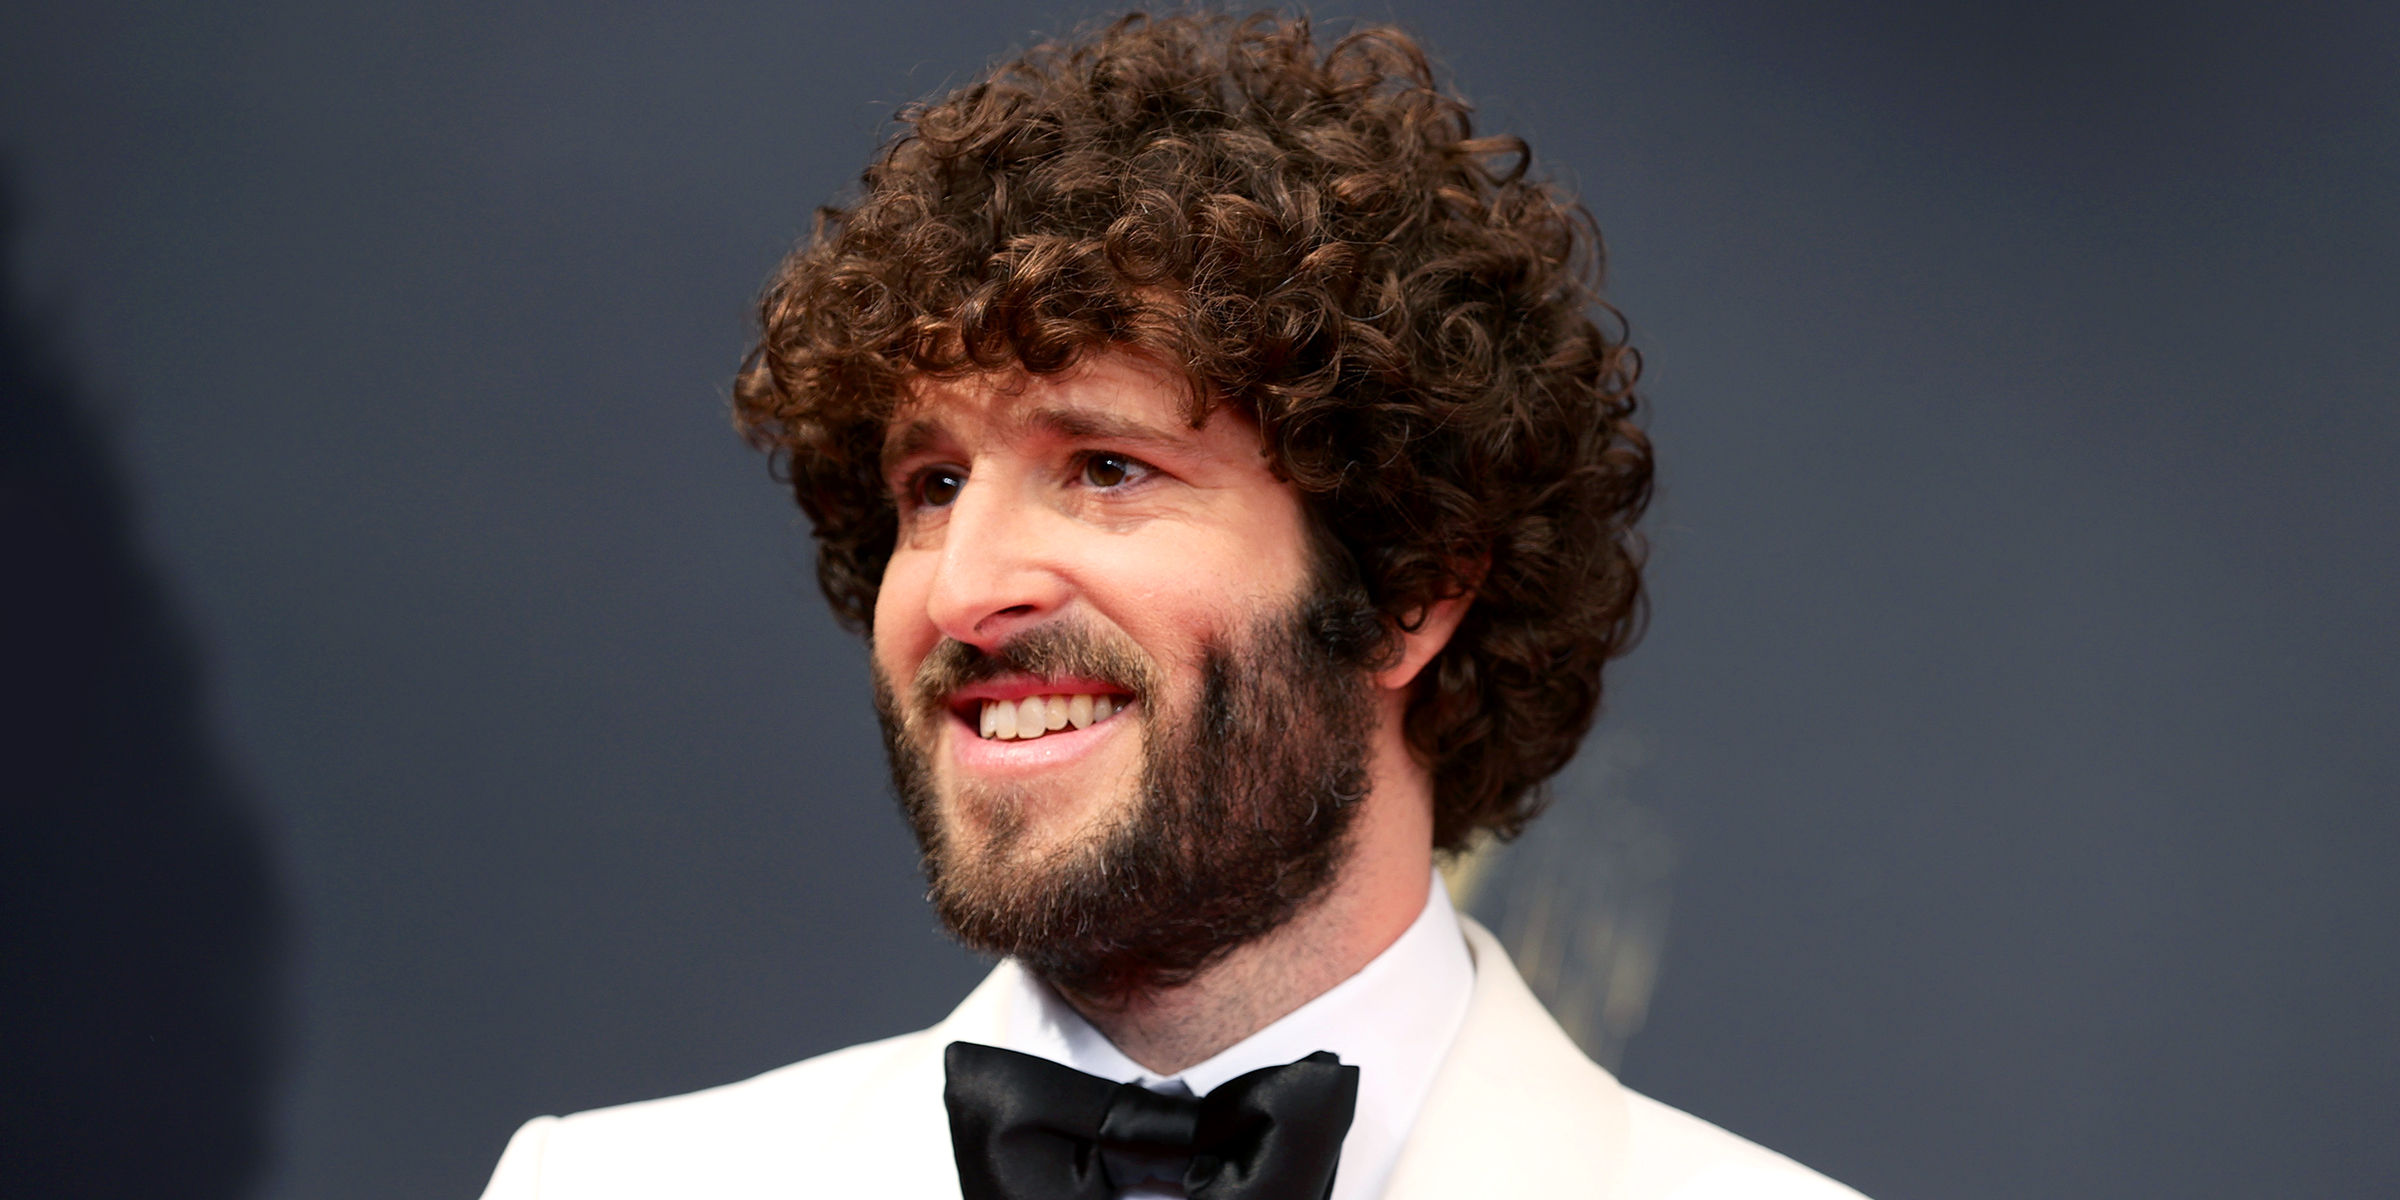 Lil Dicky | Source: Getty Images